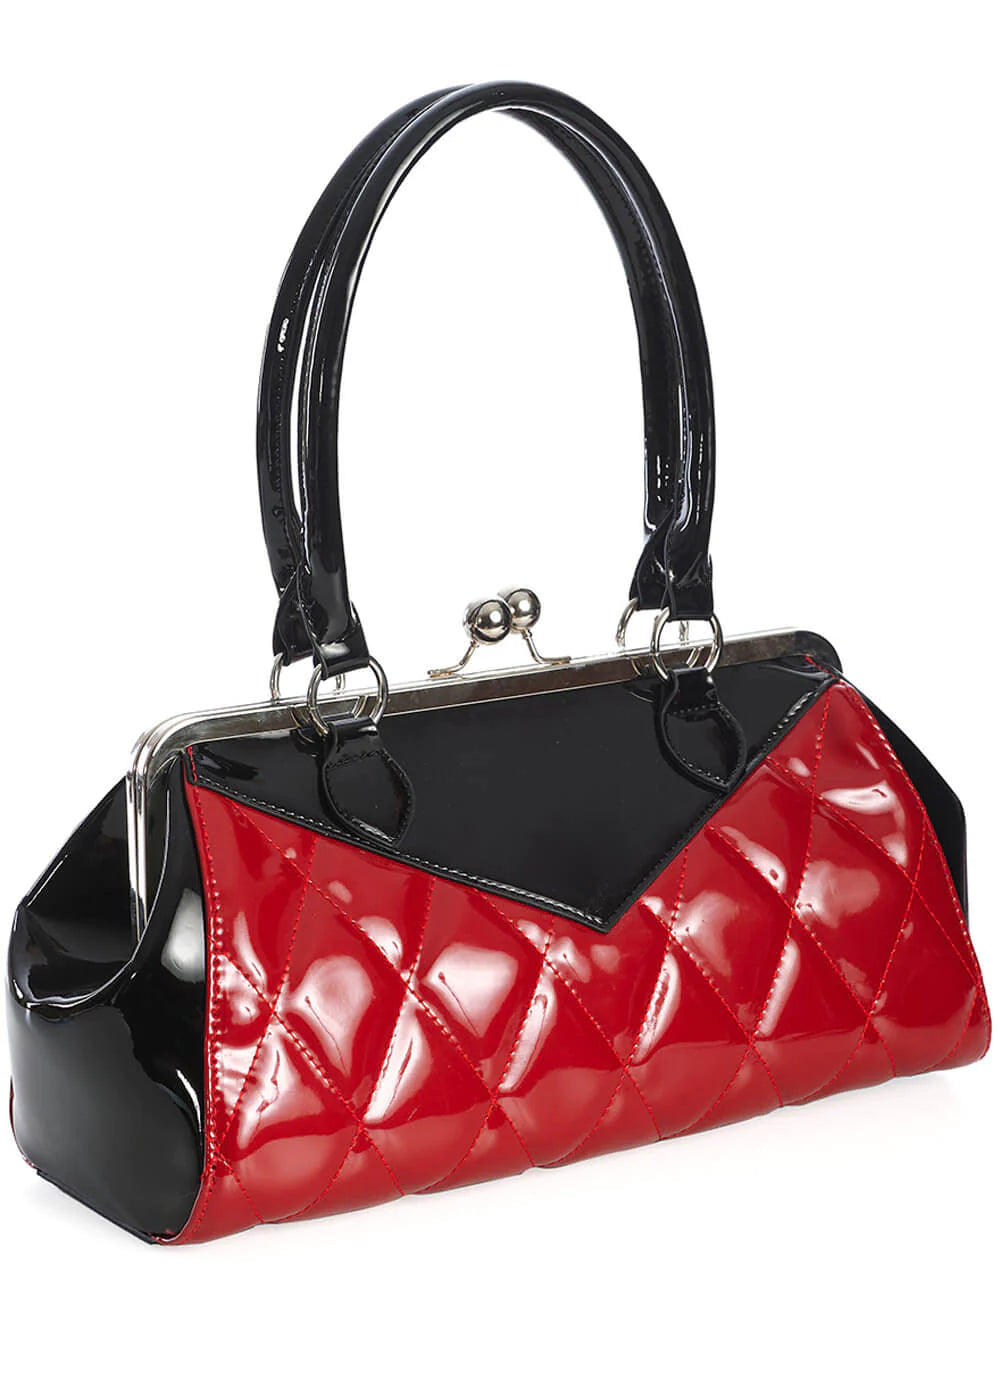 Red and Black Quilted Vintage Style Handbag